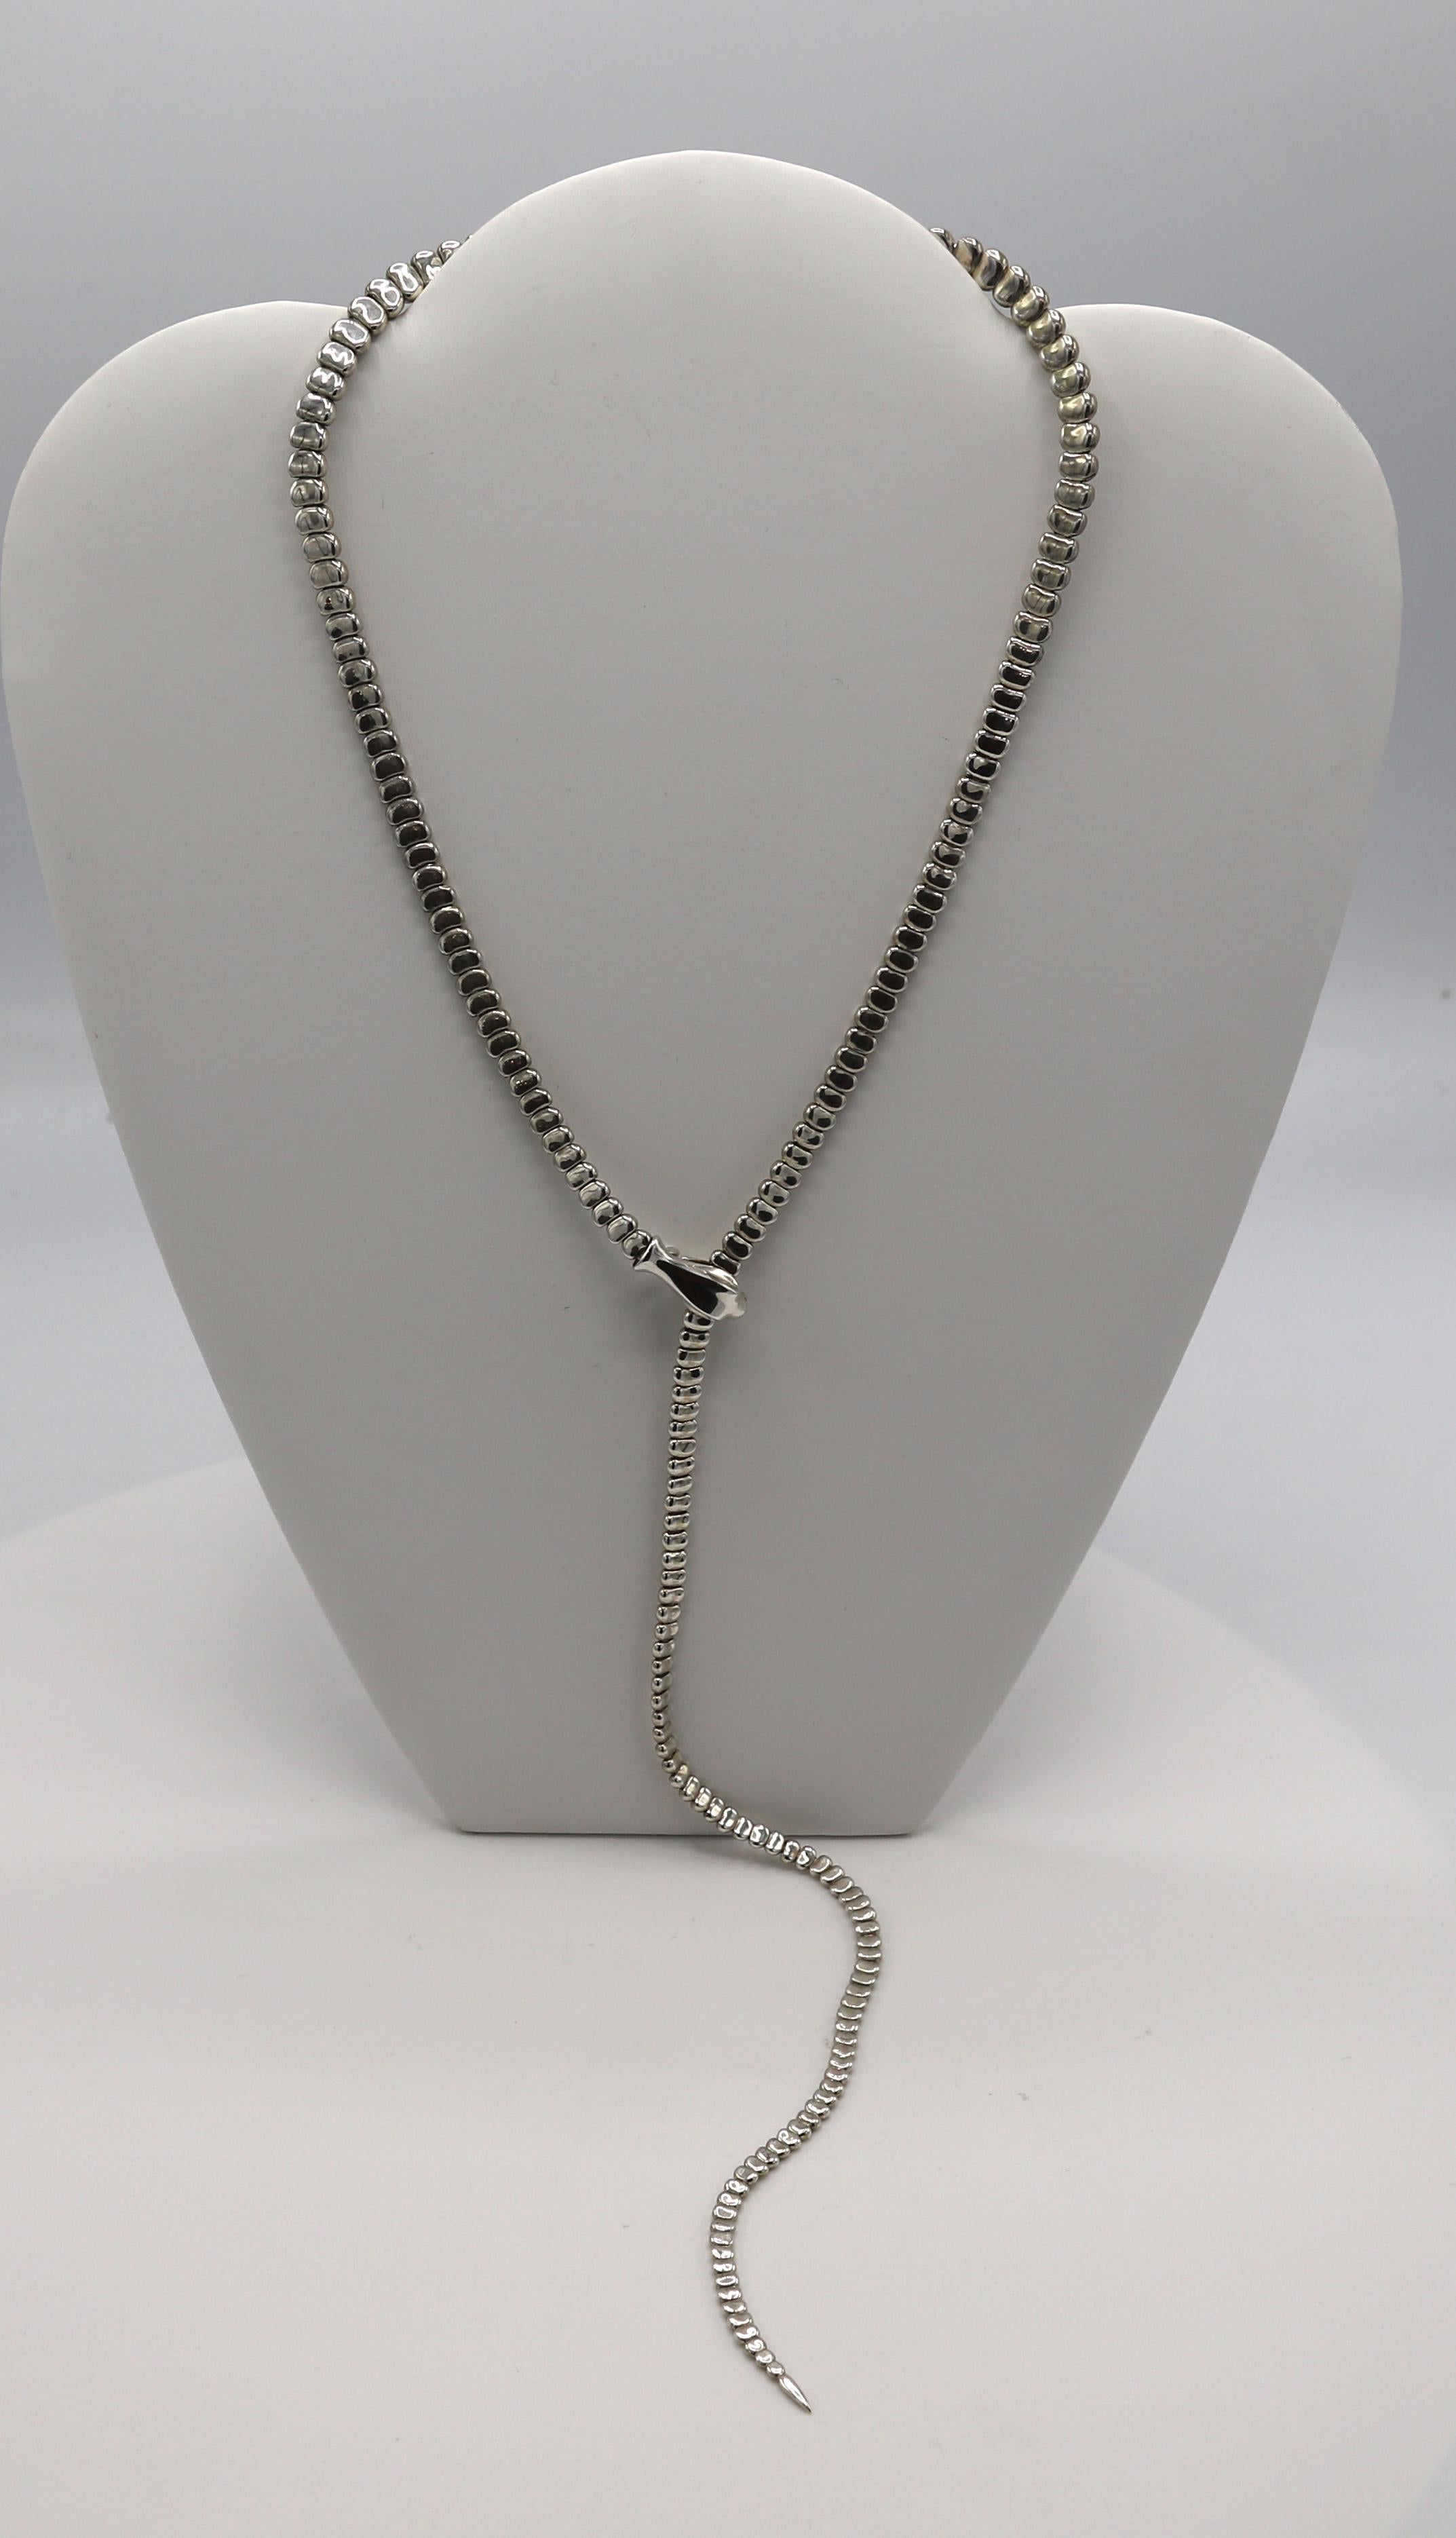 Tiffany & Co. Elsa Peretti Sterling Silver Snake Lariat Necklace 
Metal: Sterling silver
Weight: 64.6 grams
Length: 27.5 inches
Width: 2mm - 8mm
Signed: Tiffany & Co. PERETTI Ag925